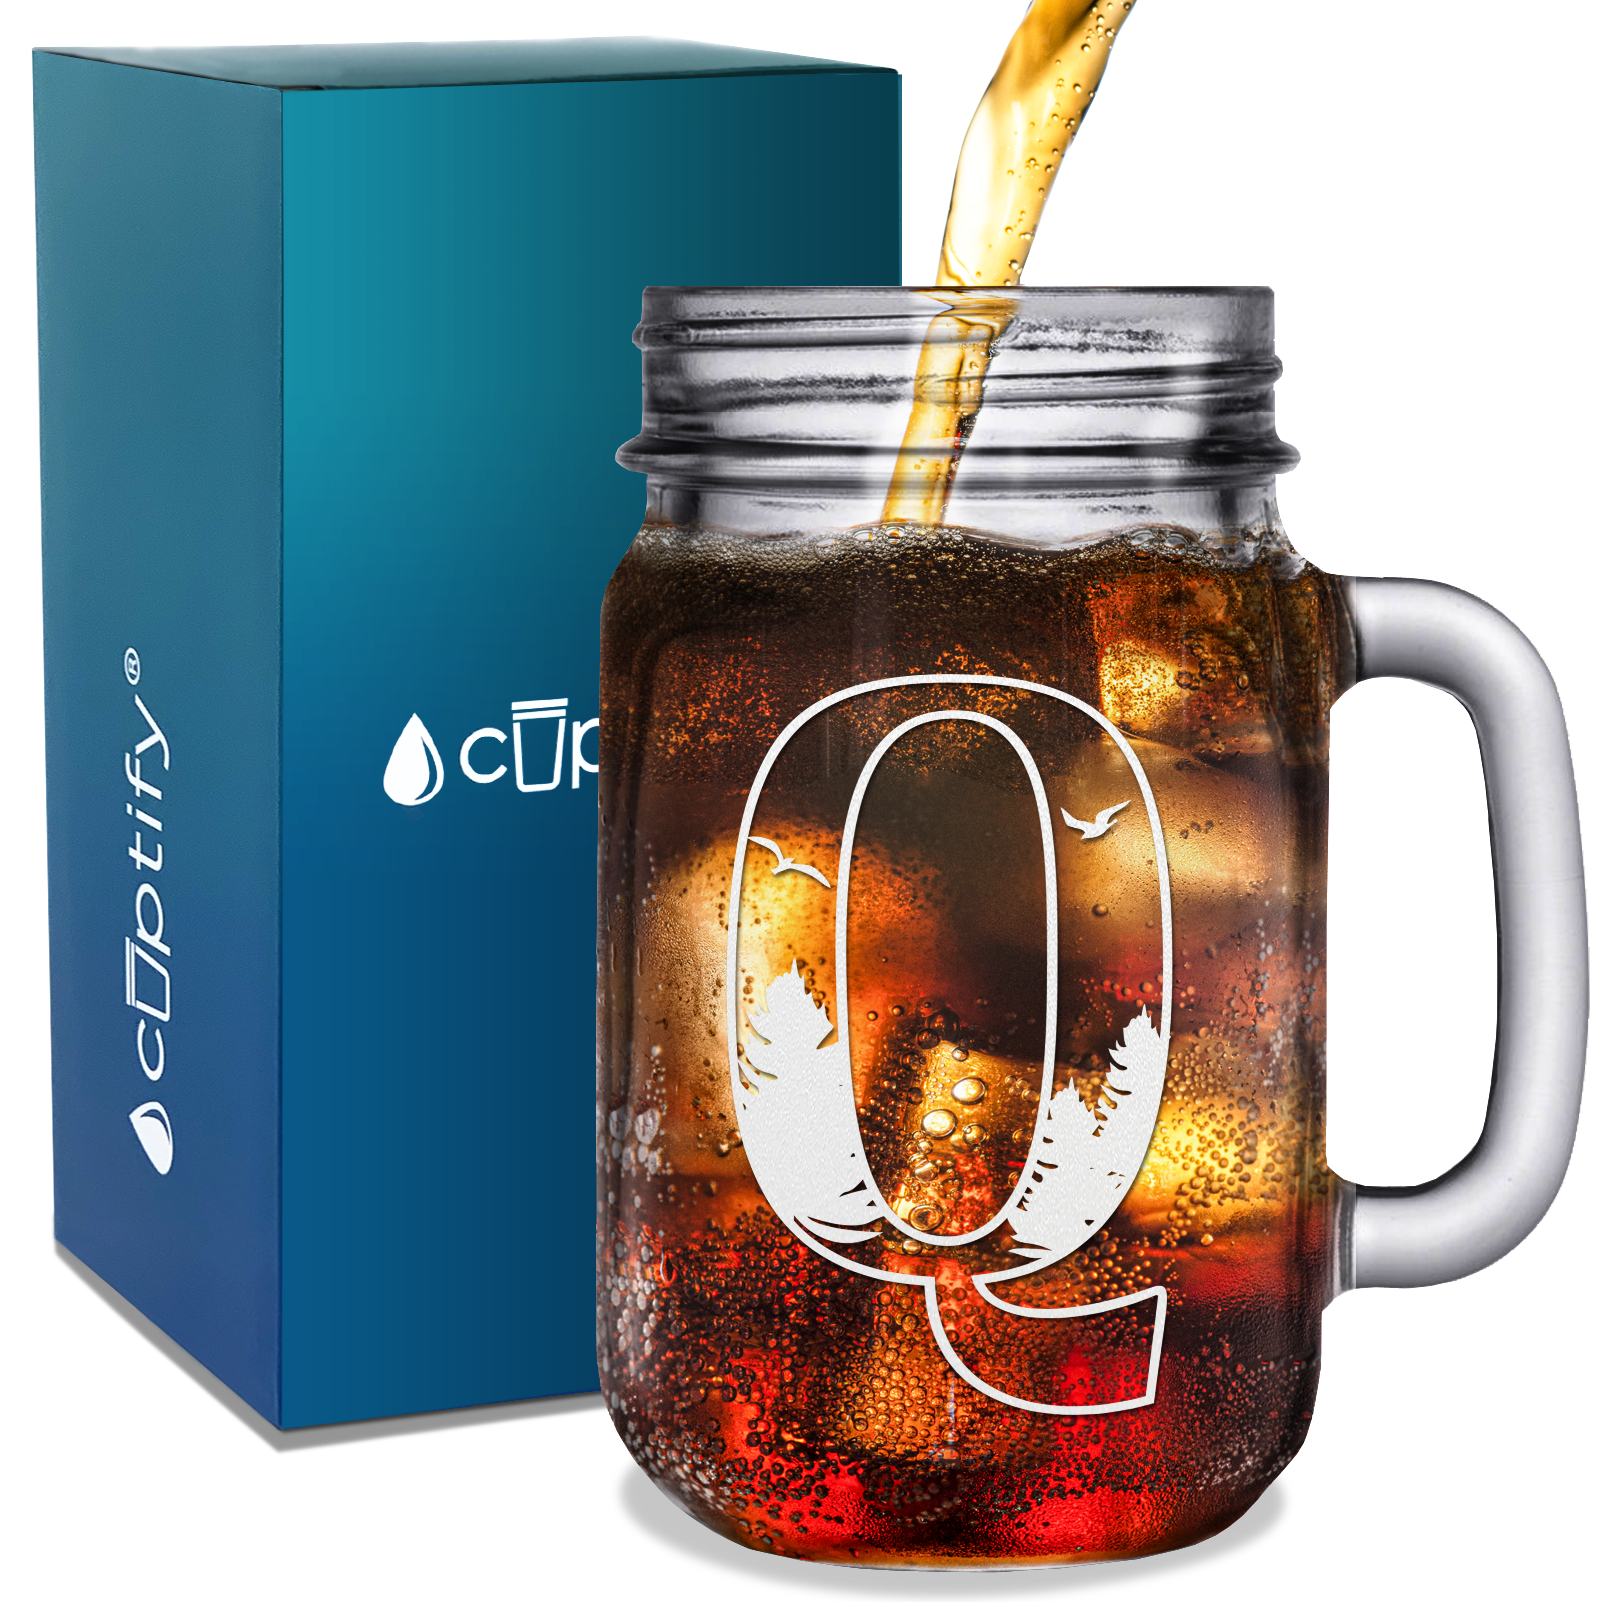  Monogram Forest Initial Letter Q Etched on 16 oz Mason Jar Glass